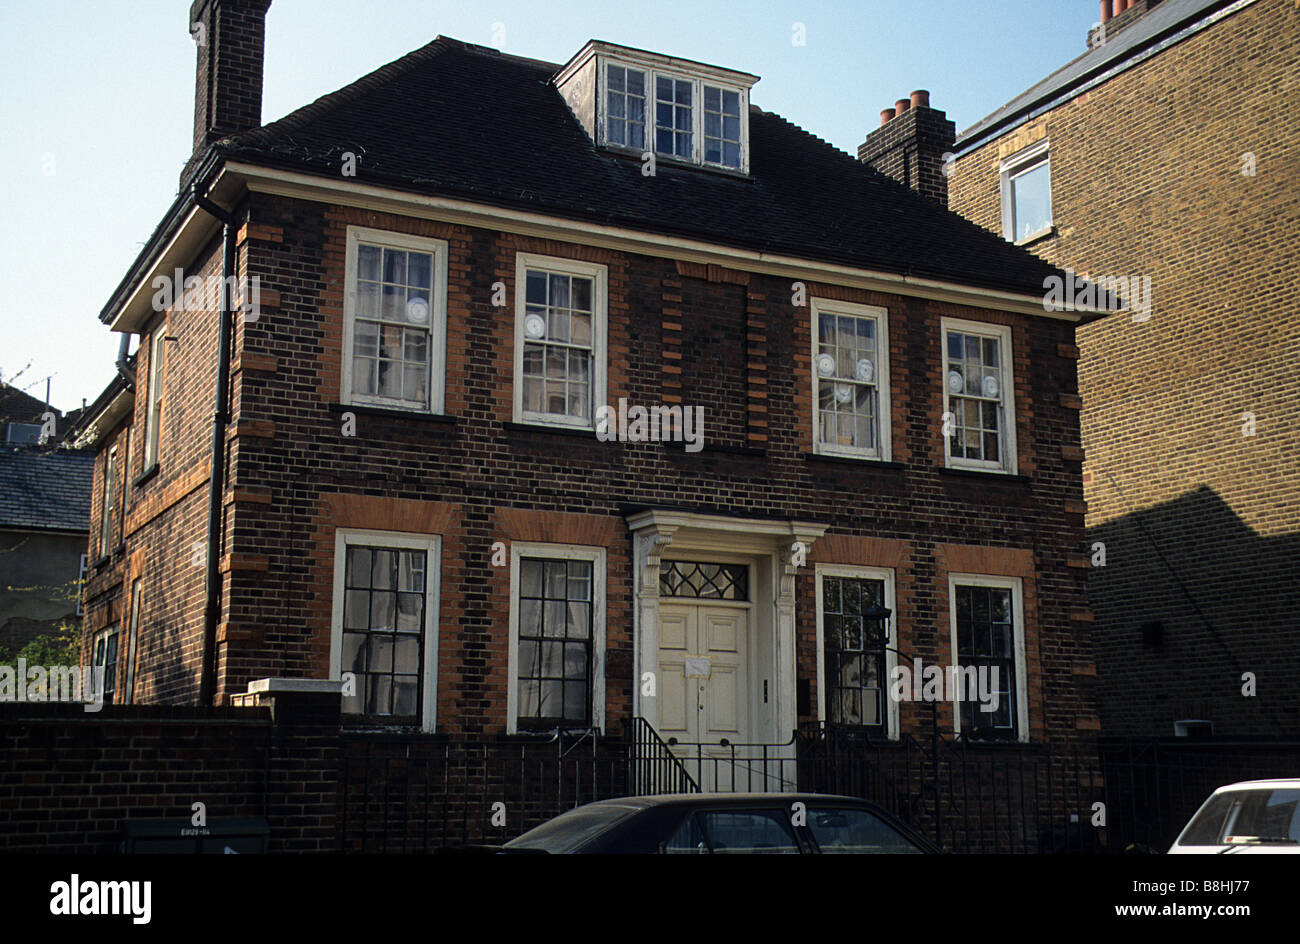 Well designed and constructed villa in Birkbeck Road, Acton, West London, in a convincing Jacobean style. Stock Photo